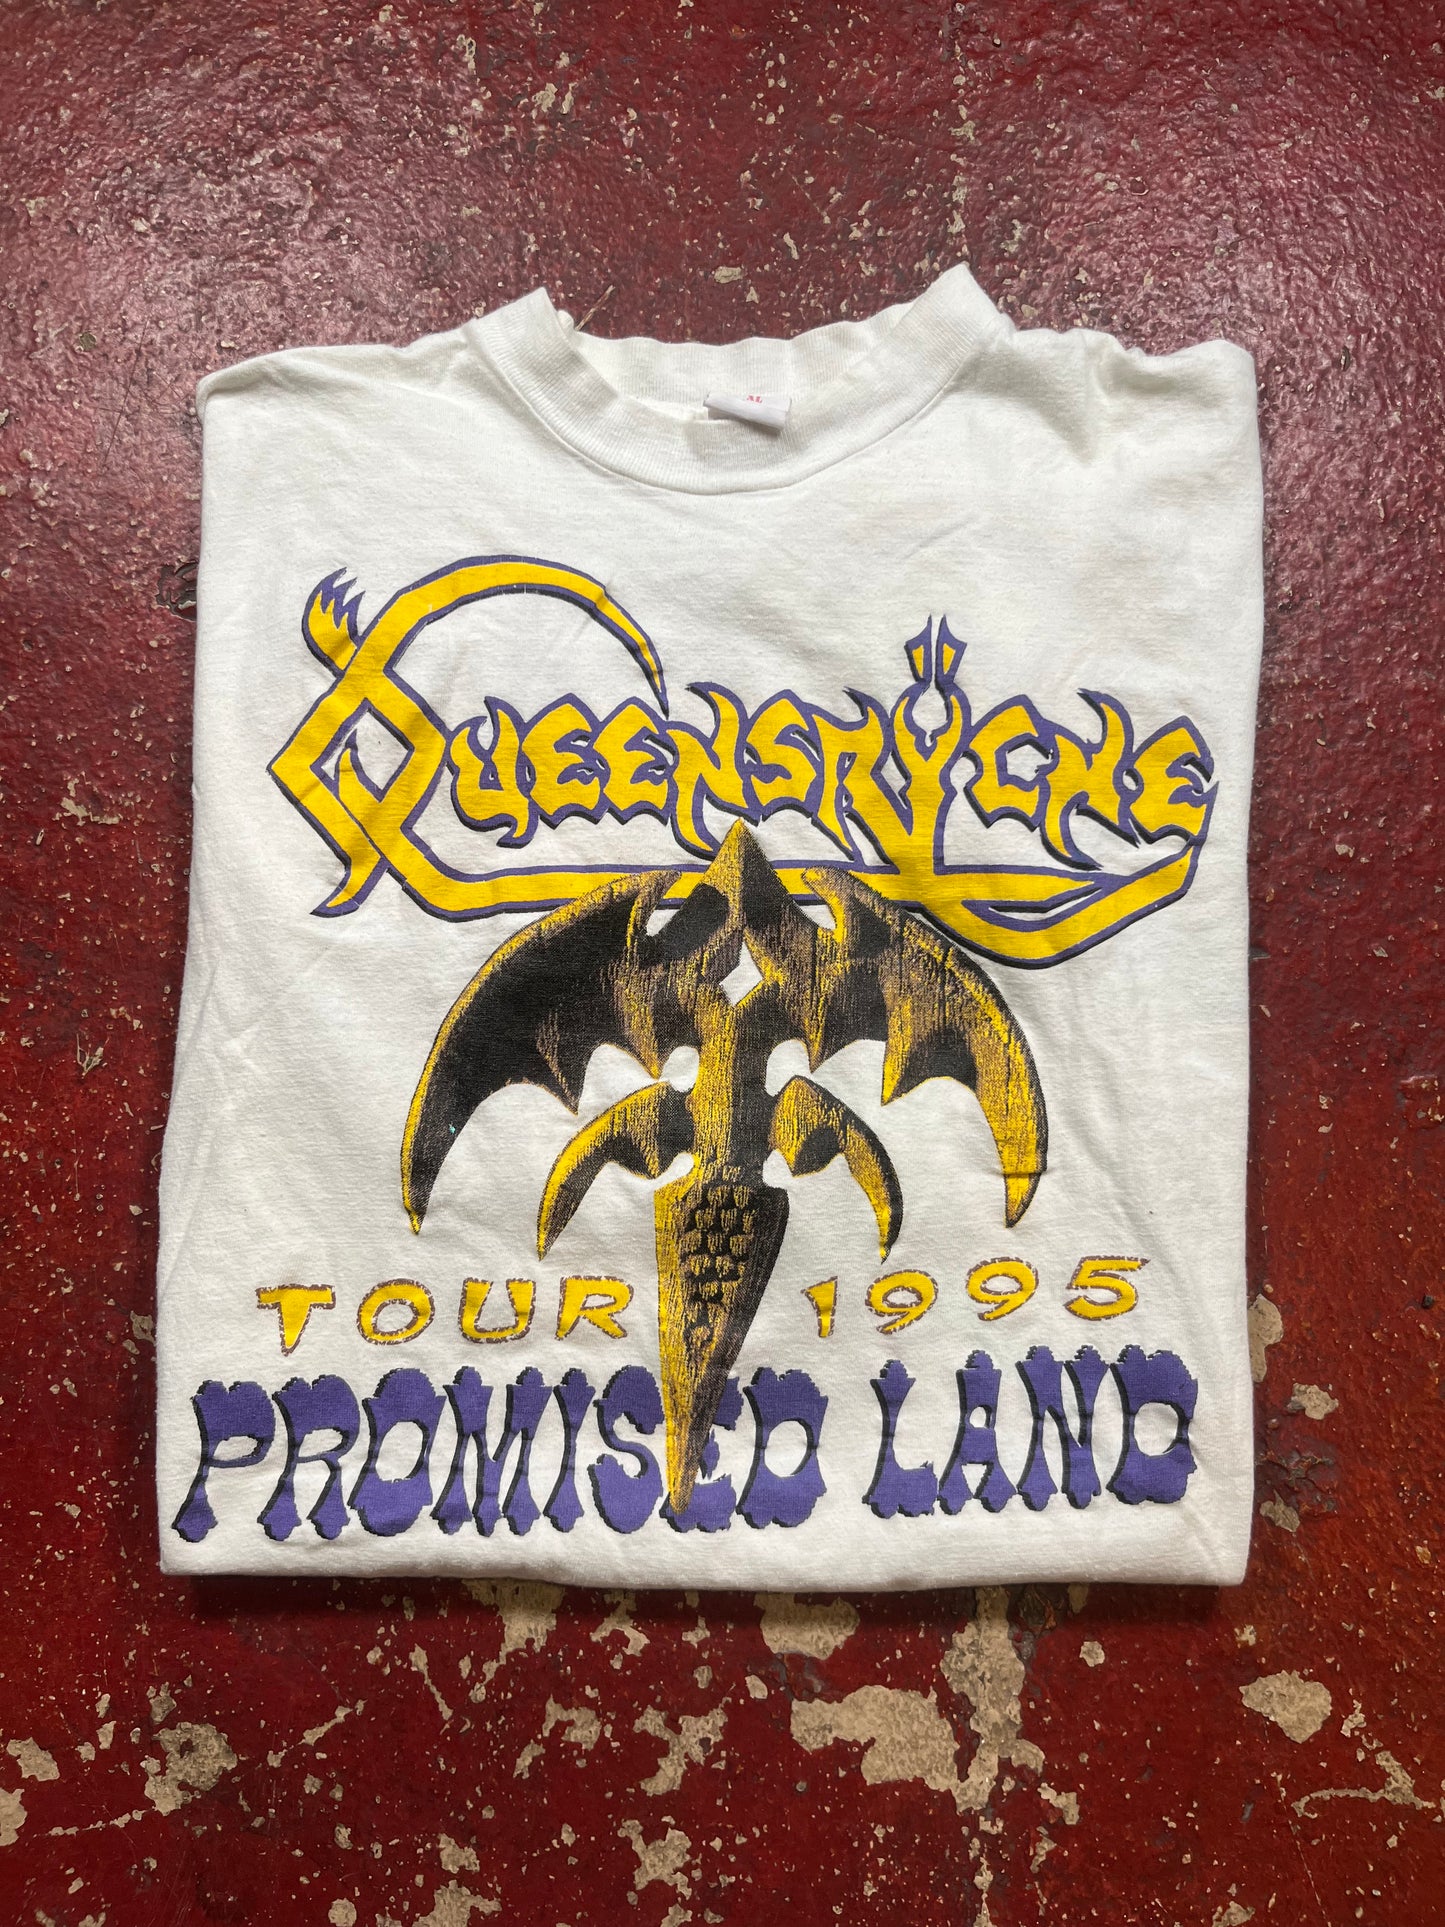 1995 Queensryche “Promised Land” Tee